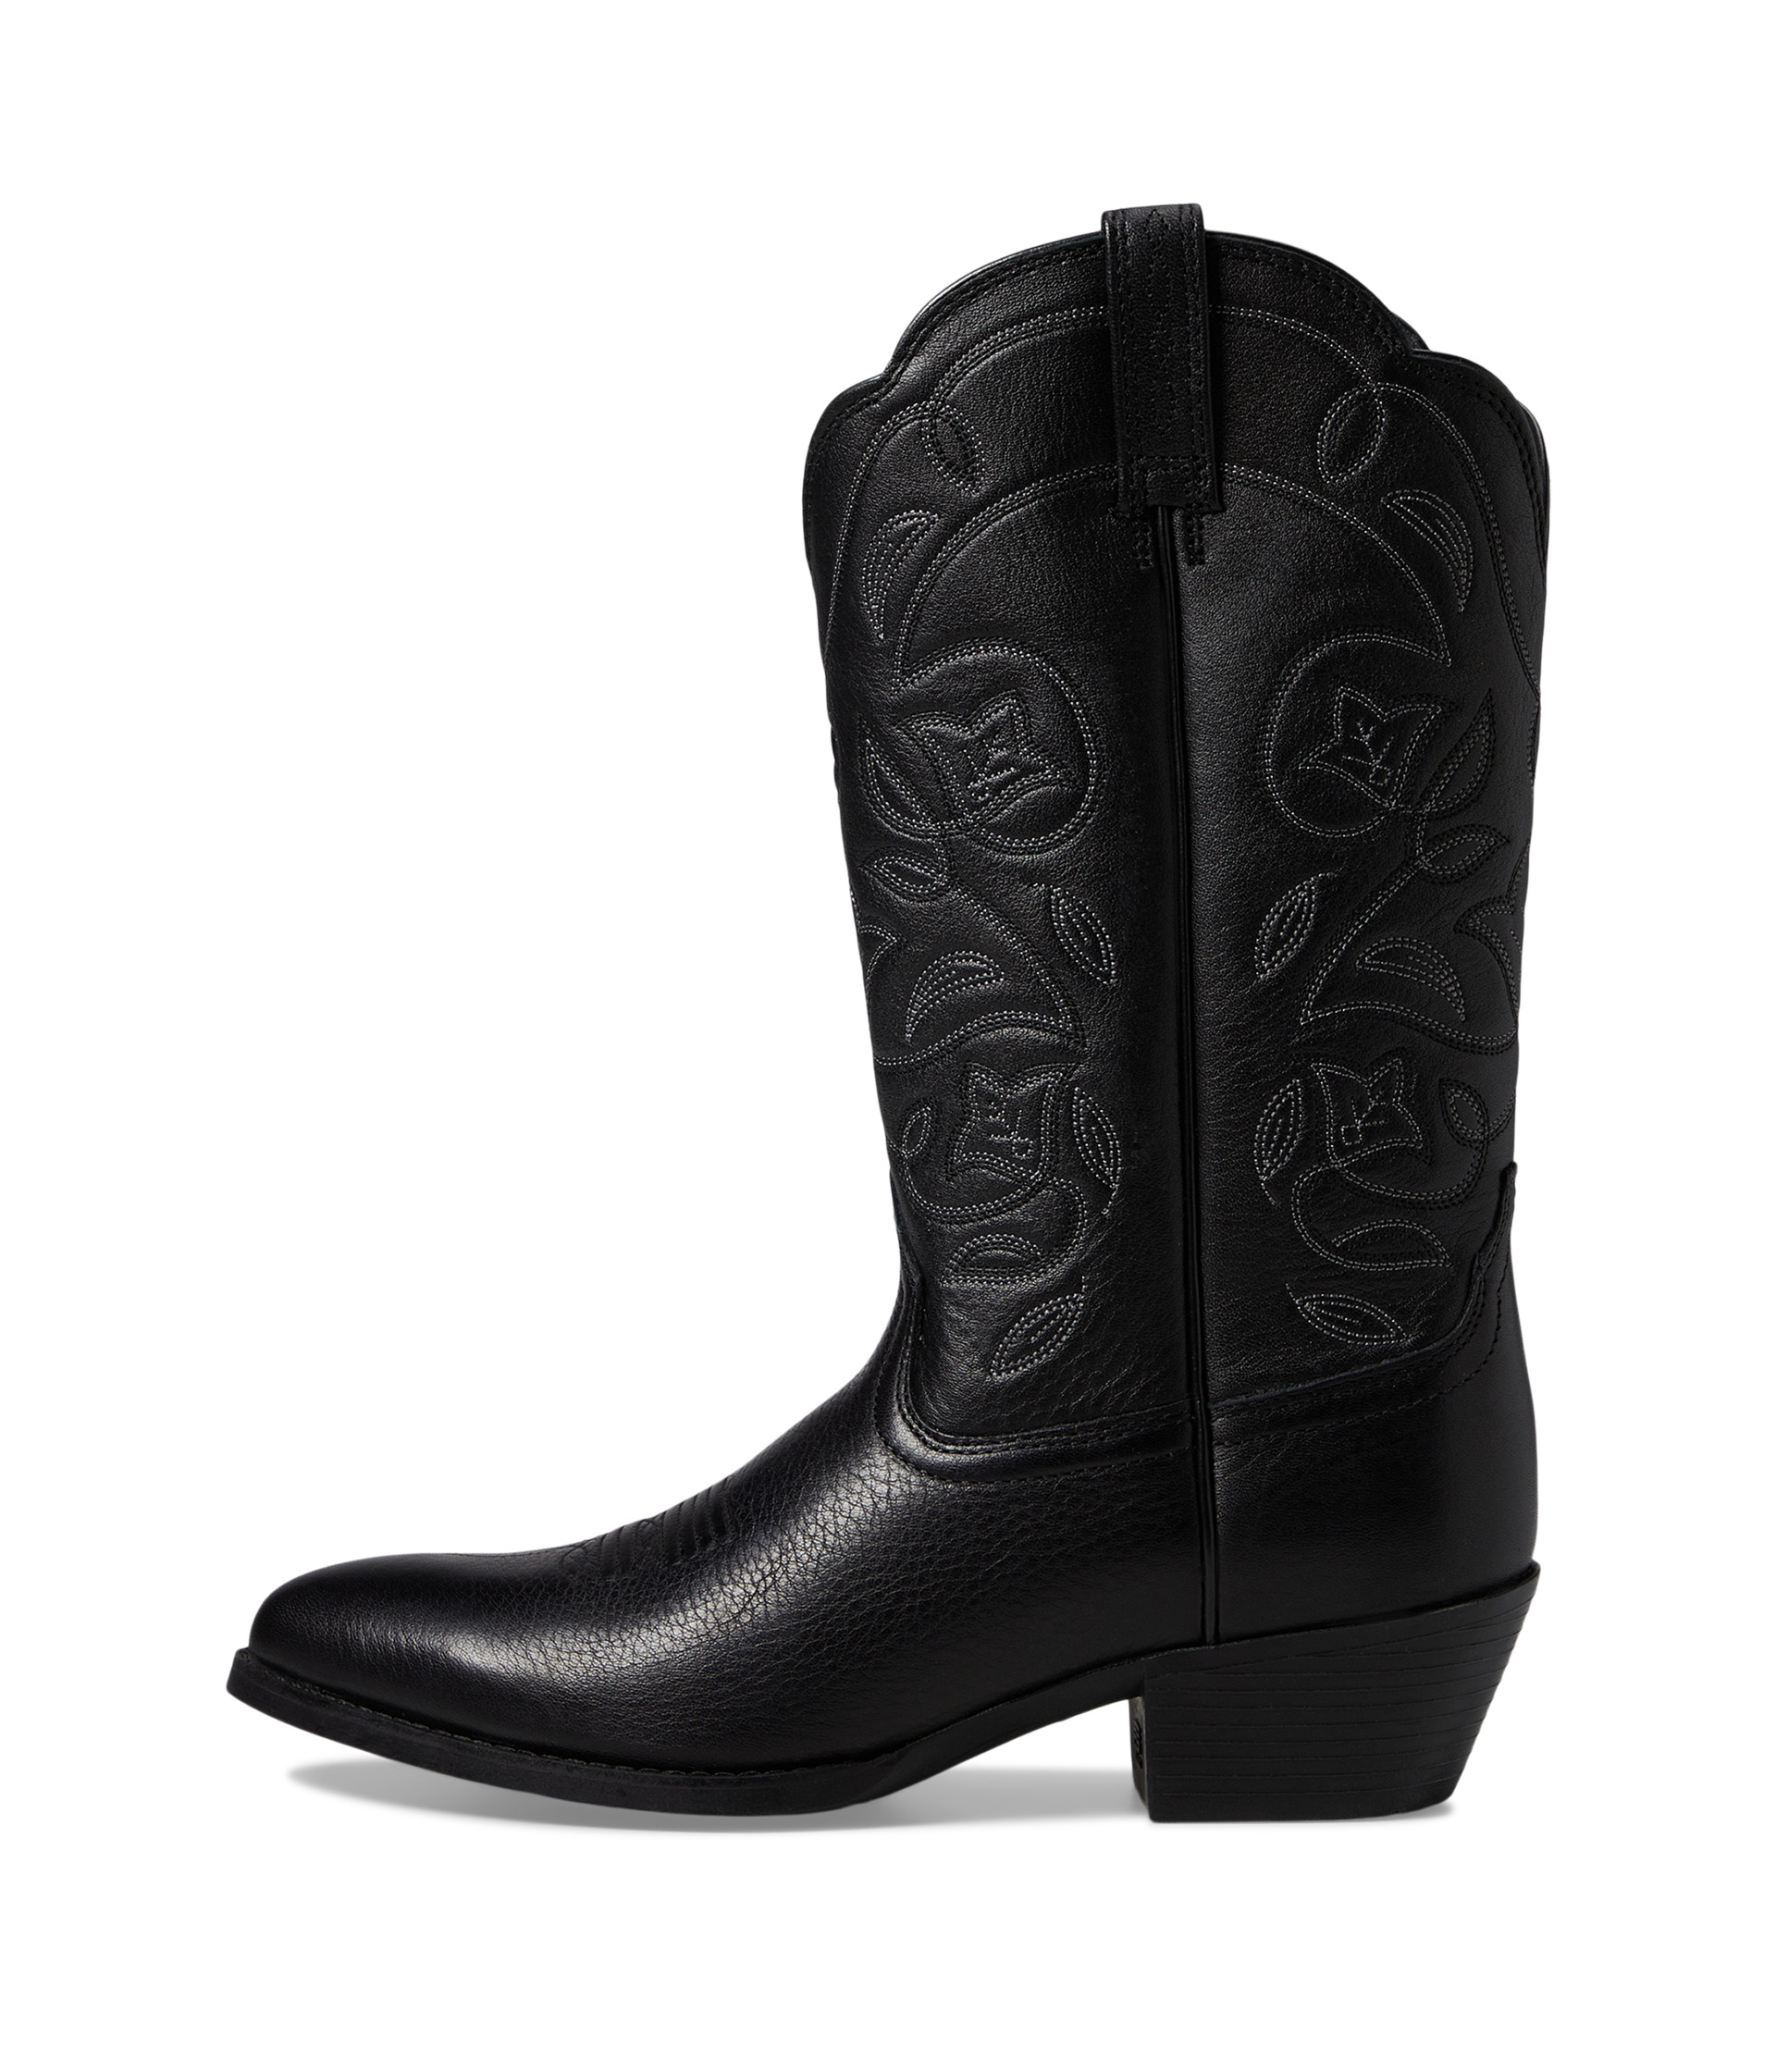 Ariat Heritage Western R-toe at Zappos.com